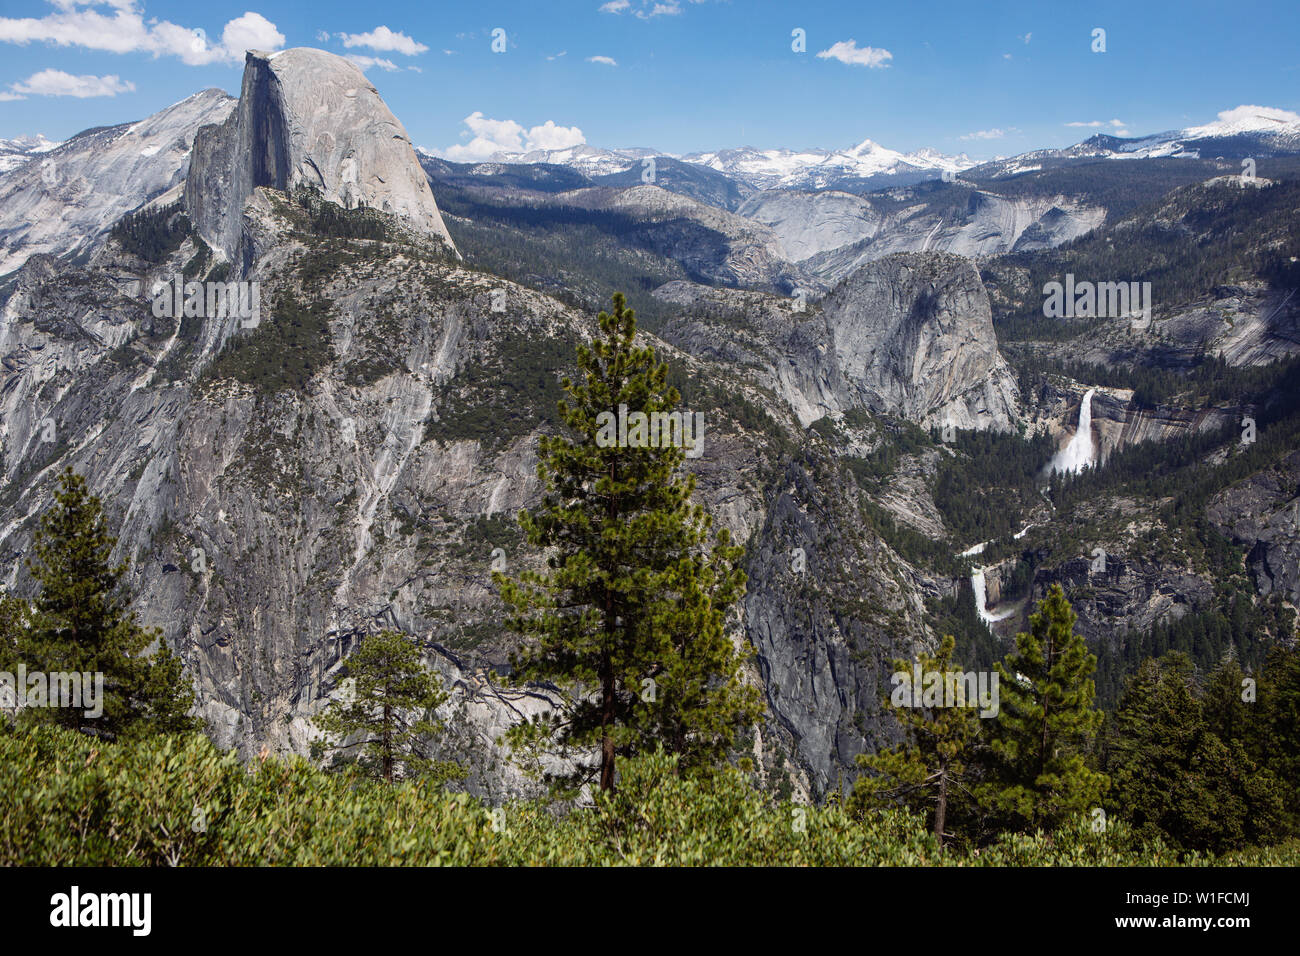 Ladscape View of the Nevada Fall, Half Dome and Yosemite Valley from Glacier Point in Yosemite National Park, California, USA Stock Photo